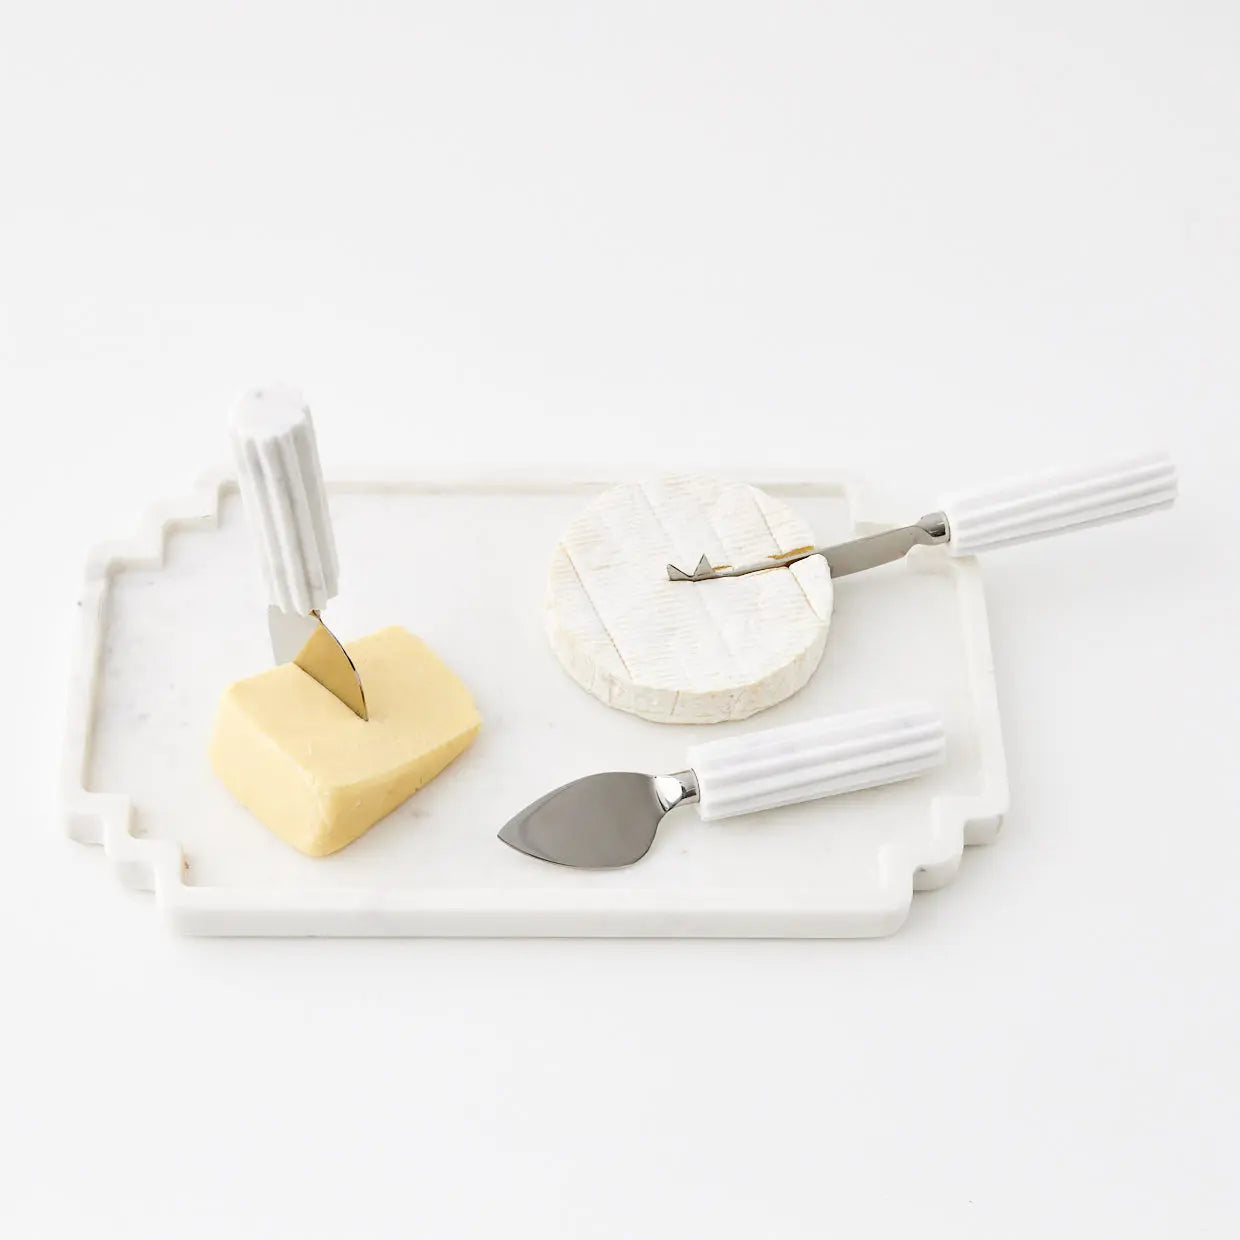 Fromage Marble/Stainless Steel Cheese Knife Set - GigiandTom